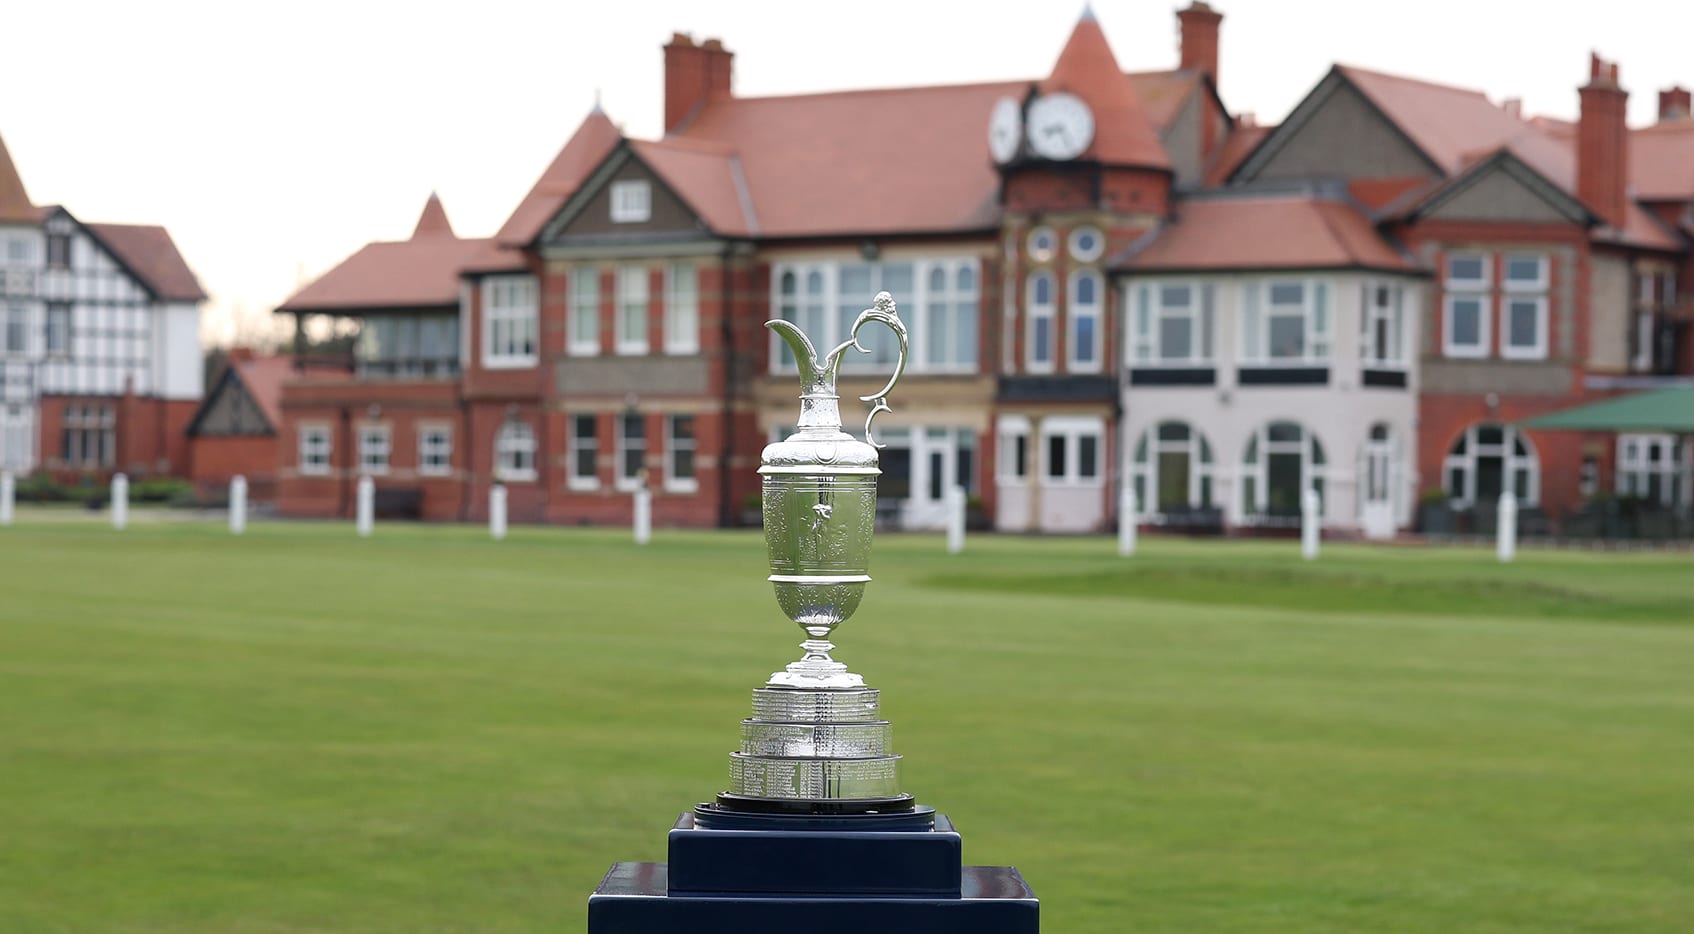 The Open Championship raises purse to 16.5 million with the winner